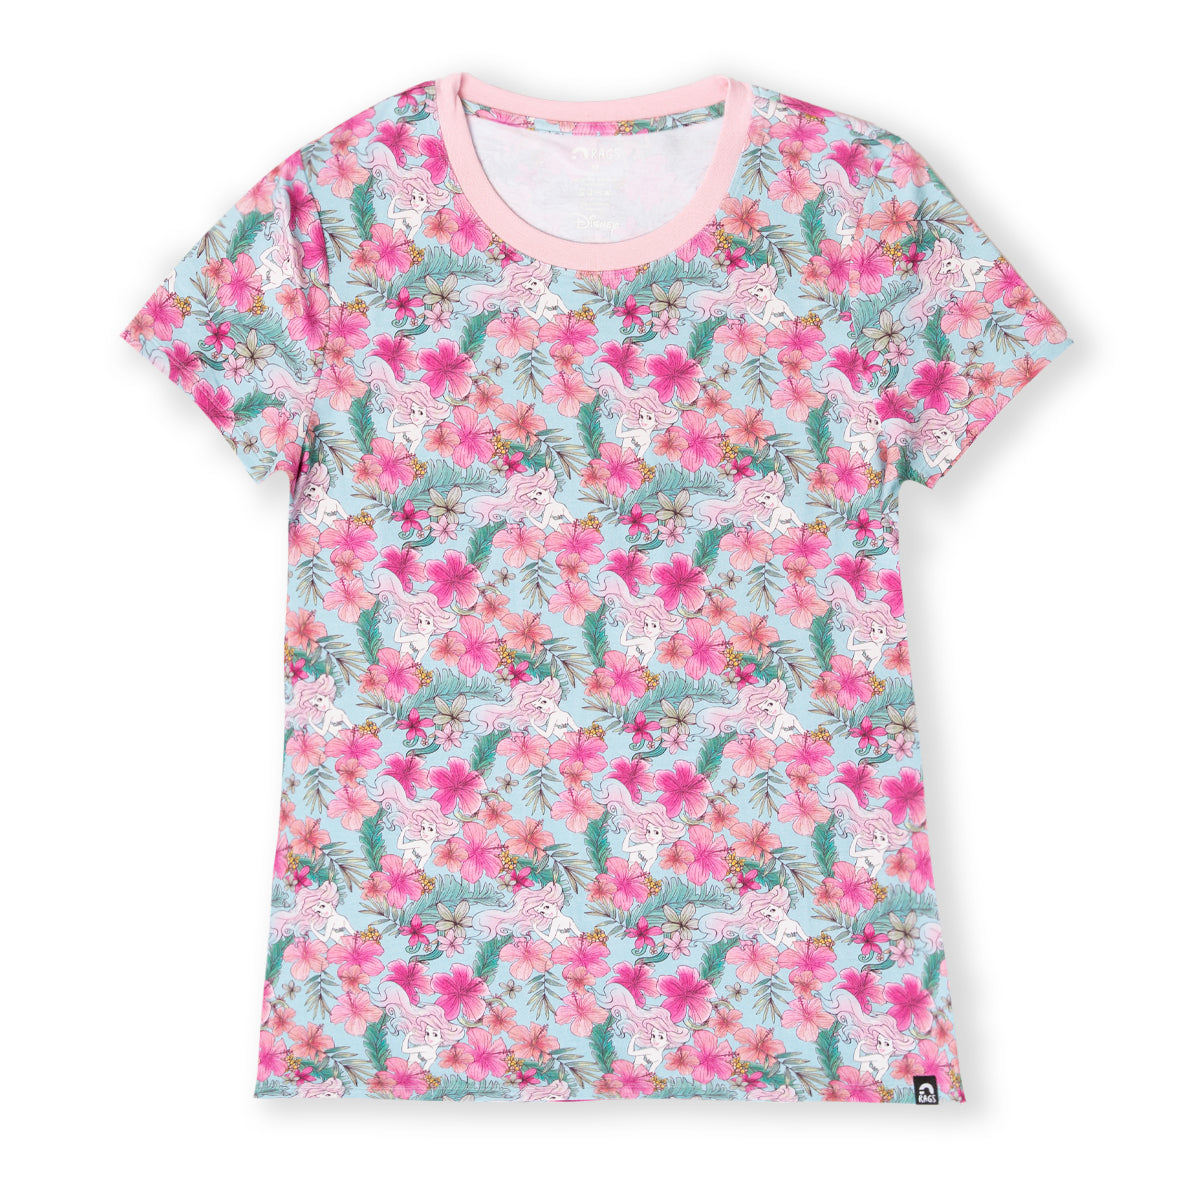 Women's Tee - 'Ariel Tropical Floral (FINAL SALE)' - Disney Princess Collection from RAGS -